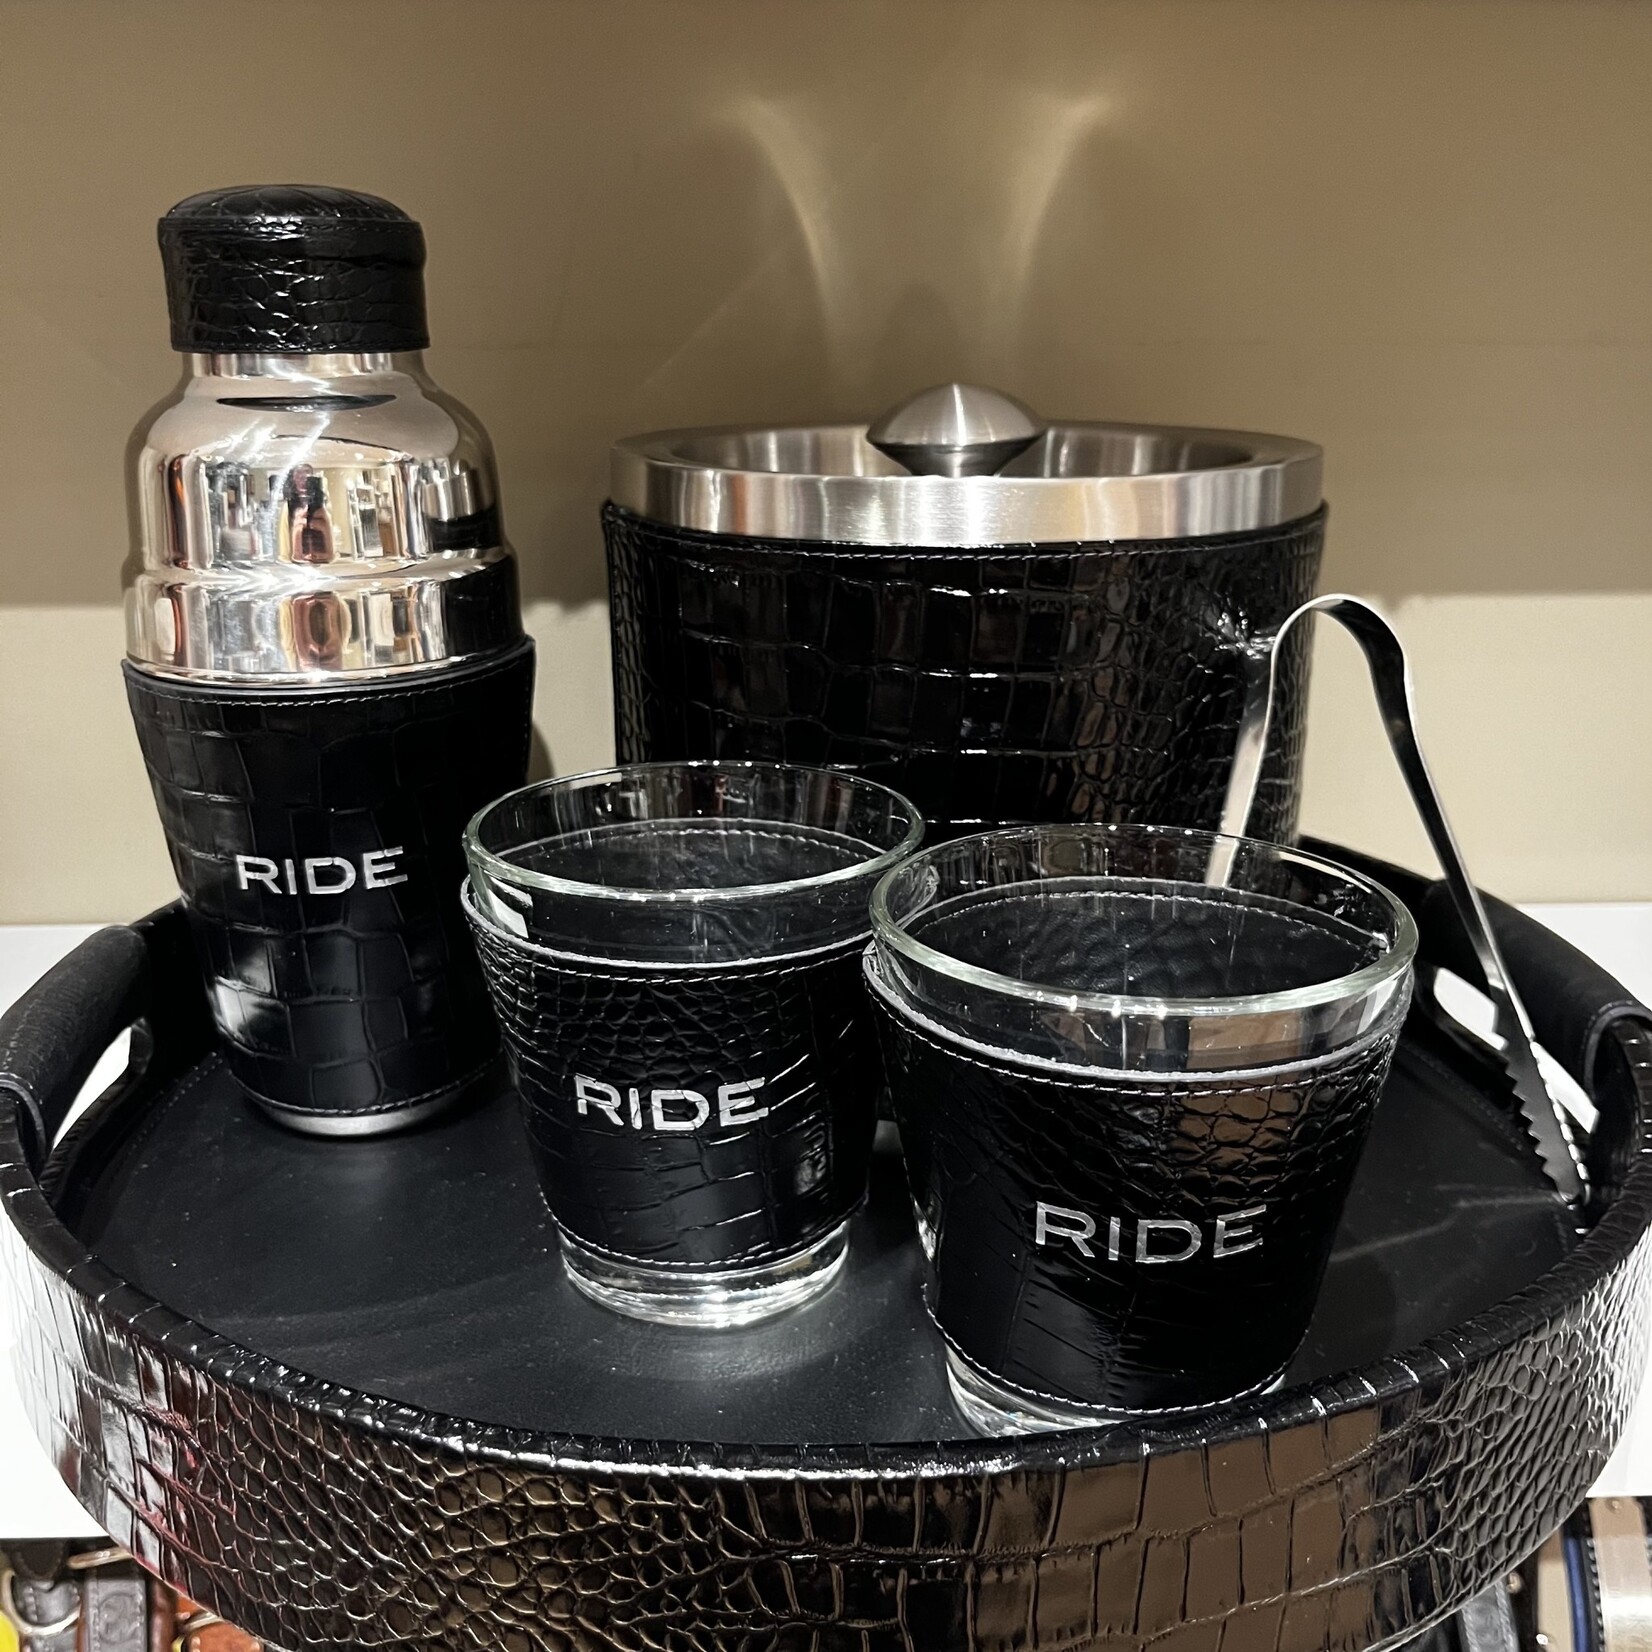 Graphic Image RIDE Leather Cocktail Shaker, silver embossed, ready for gifting in an elegant black box